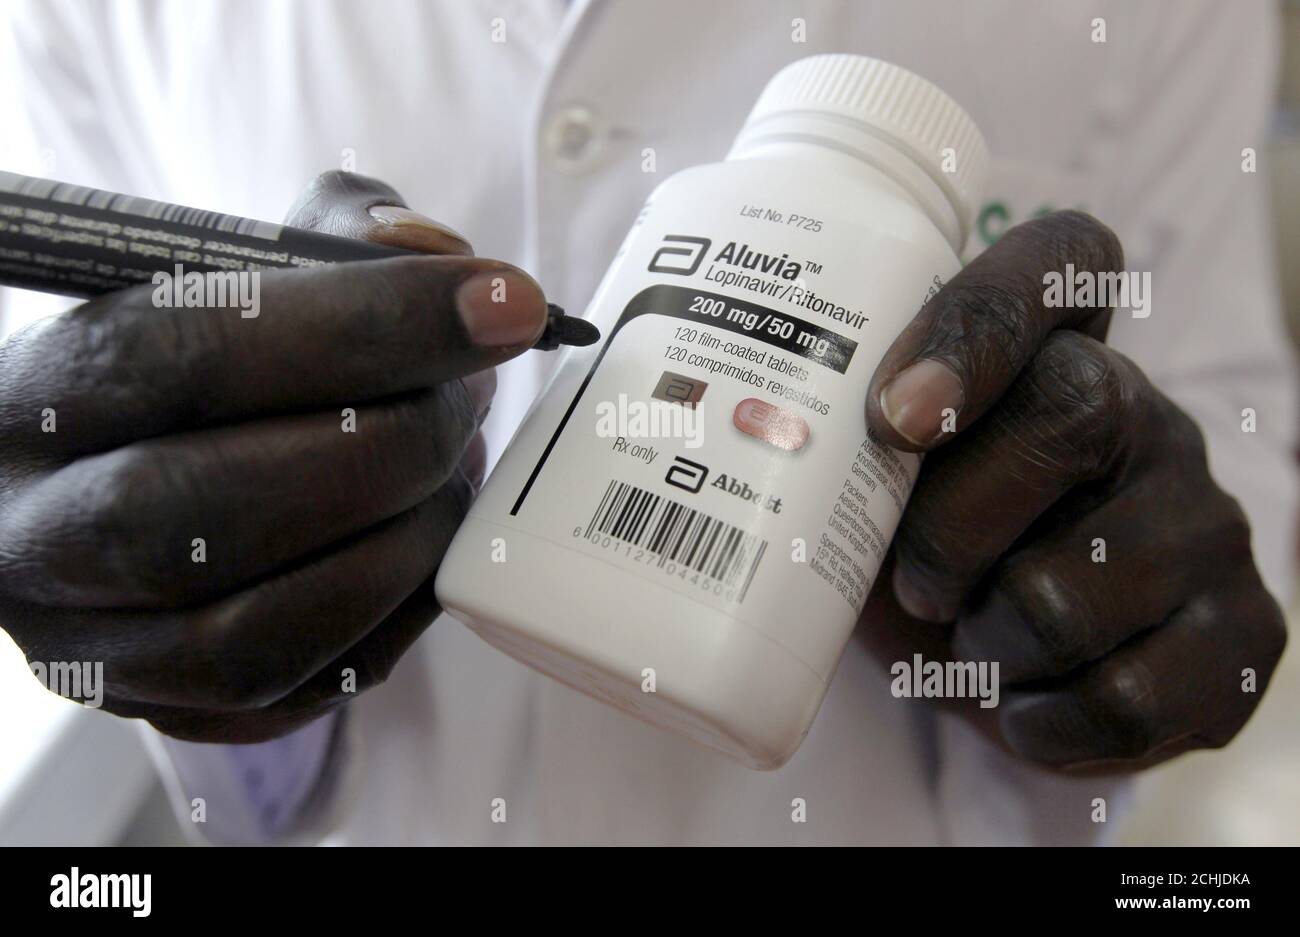 Michael Otieno, a pharmacist,Â dispenses anti-retroviral (ARV) drugs at the Mater Hospital in Kenya's capital Nairobi, September 10, 2015. Most of the 3,000 patients at Mater Hospital's Comprehensive Care Clinic, dedicated to HIV/AIDS treatment, come from nearby shanty towns. In Kenya, HIV prevalence among adults has almost halved since the mid-1990s to 5.3 percent in 2014, according to UNAIDS. Yet HIV/AIDS remains the leading cause of death in Kenya, responsible for nearly three in 10 deaths in the east African country, where 1.6 million Kenyans are infected, government data in 2014 shows. Pi Stock Photo